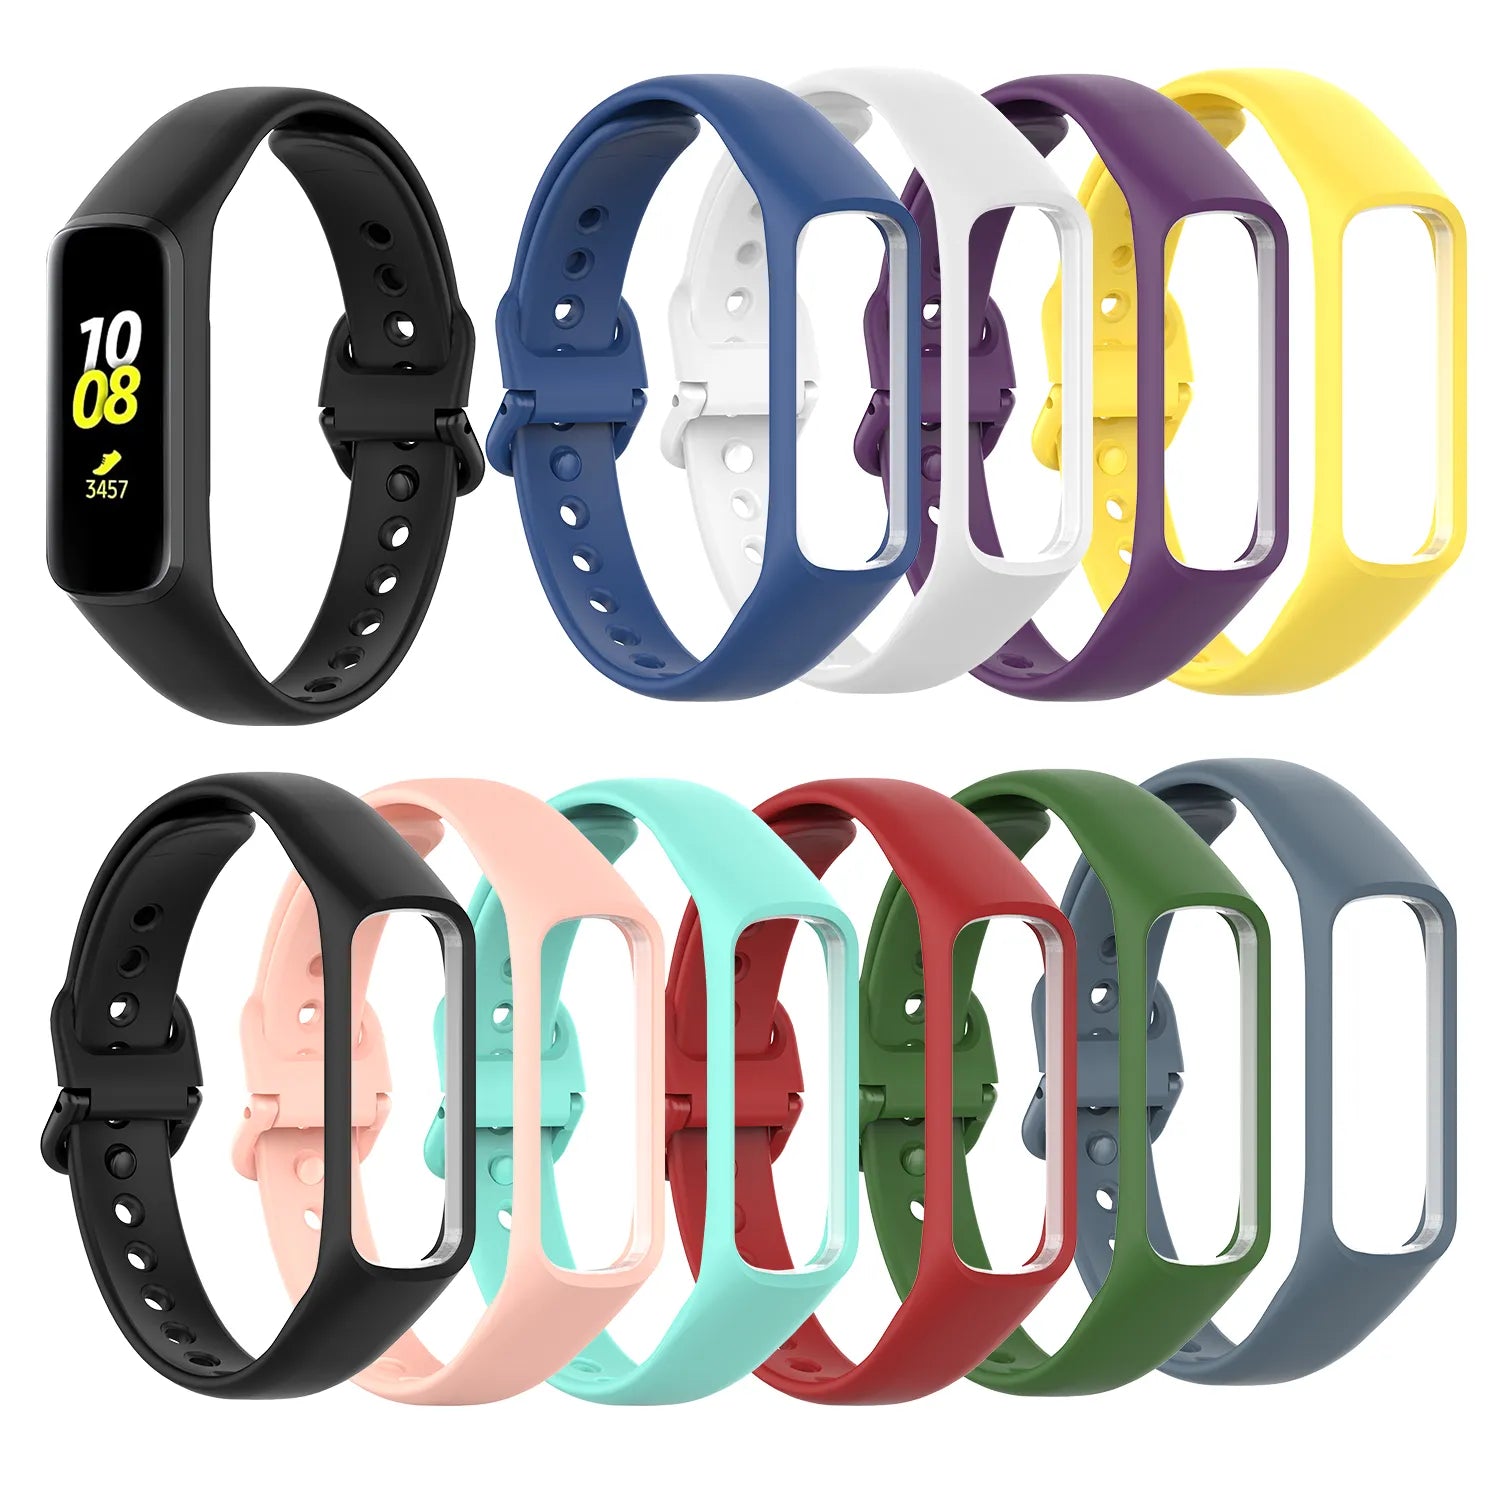 New Fit-e R375 Smart Watch Band For Fit E Fitness Tracker Wristband Accessories Sport Strap For Samsung Galaxy Fit-e R375